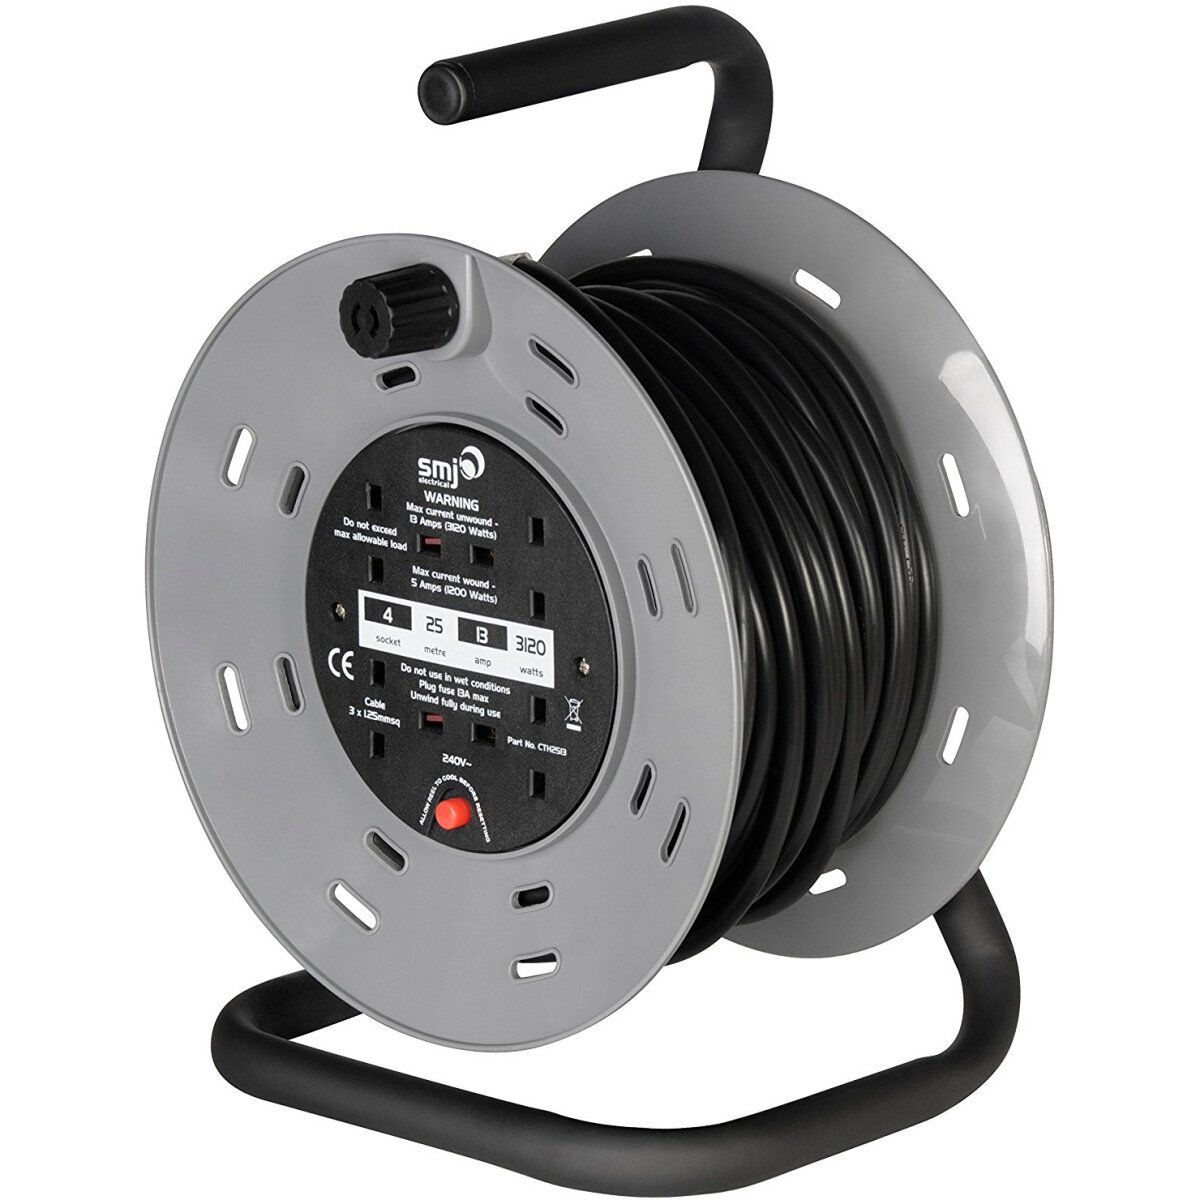 SMJ CTH2513 25Mtr 240v 13amp Cable Reel 4 Sockets